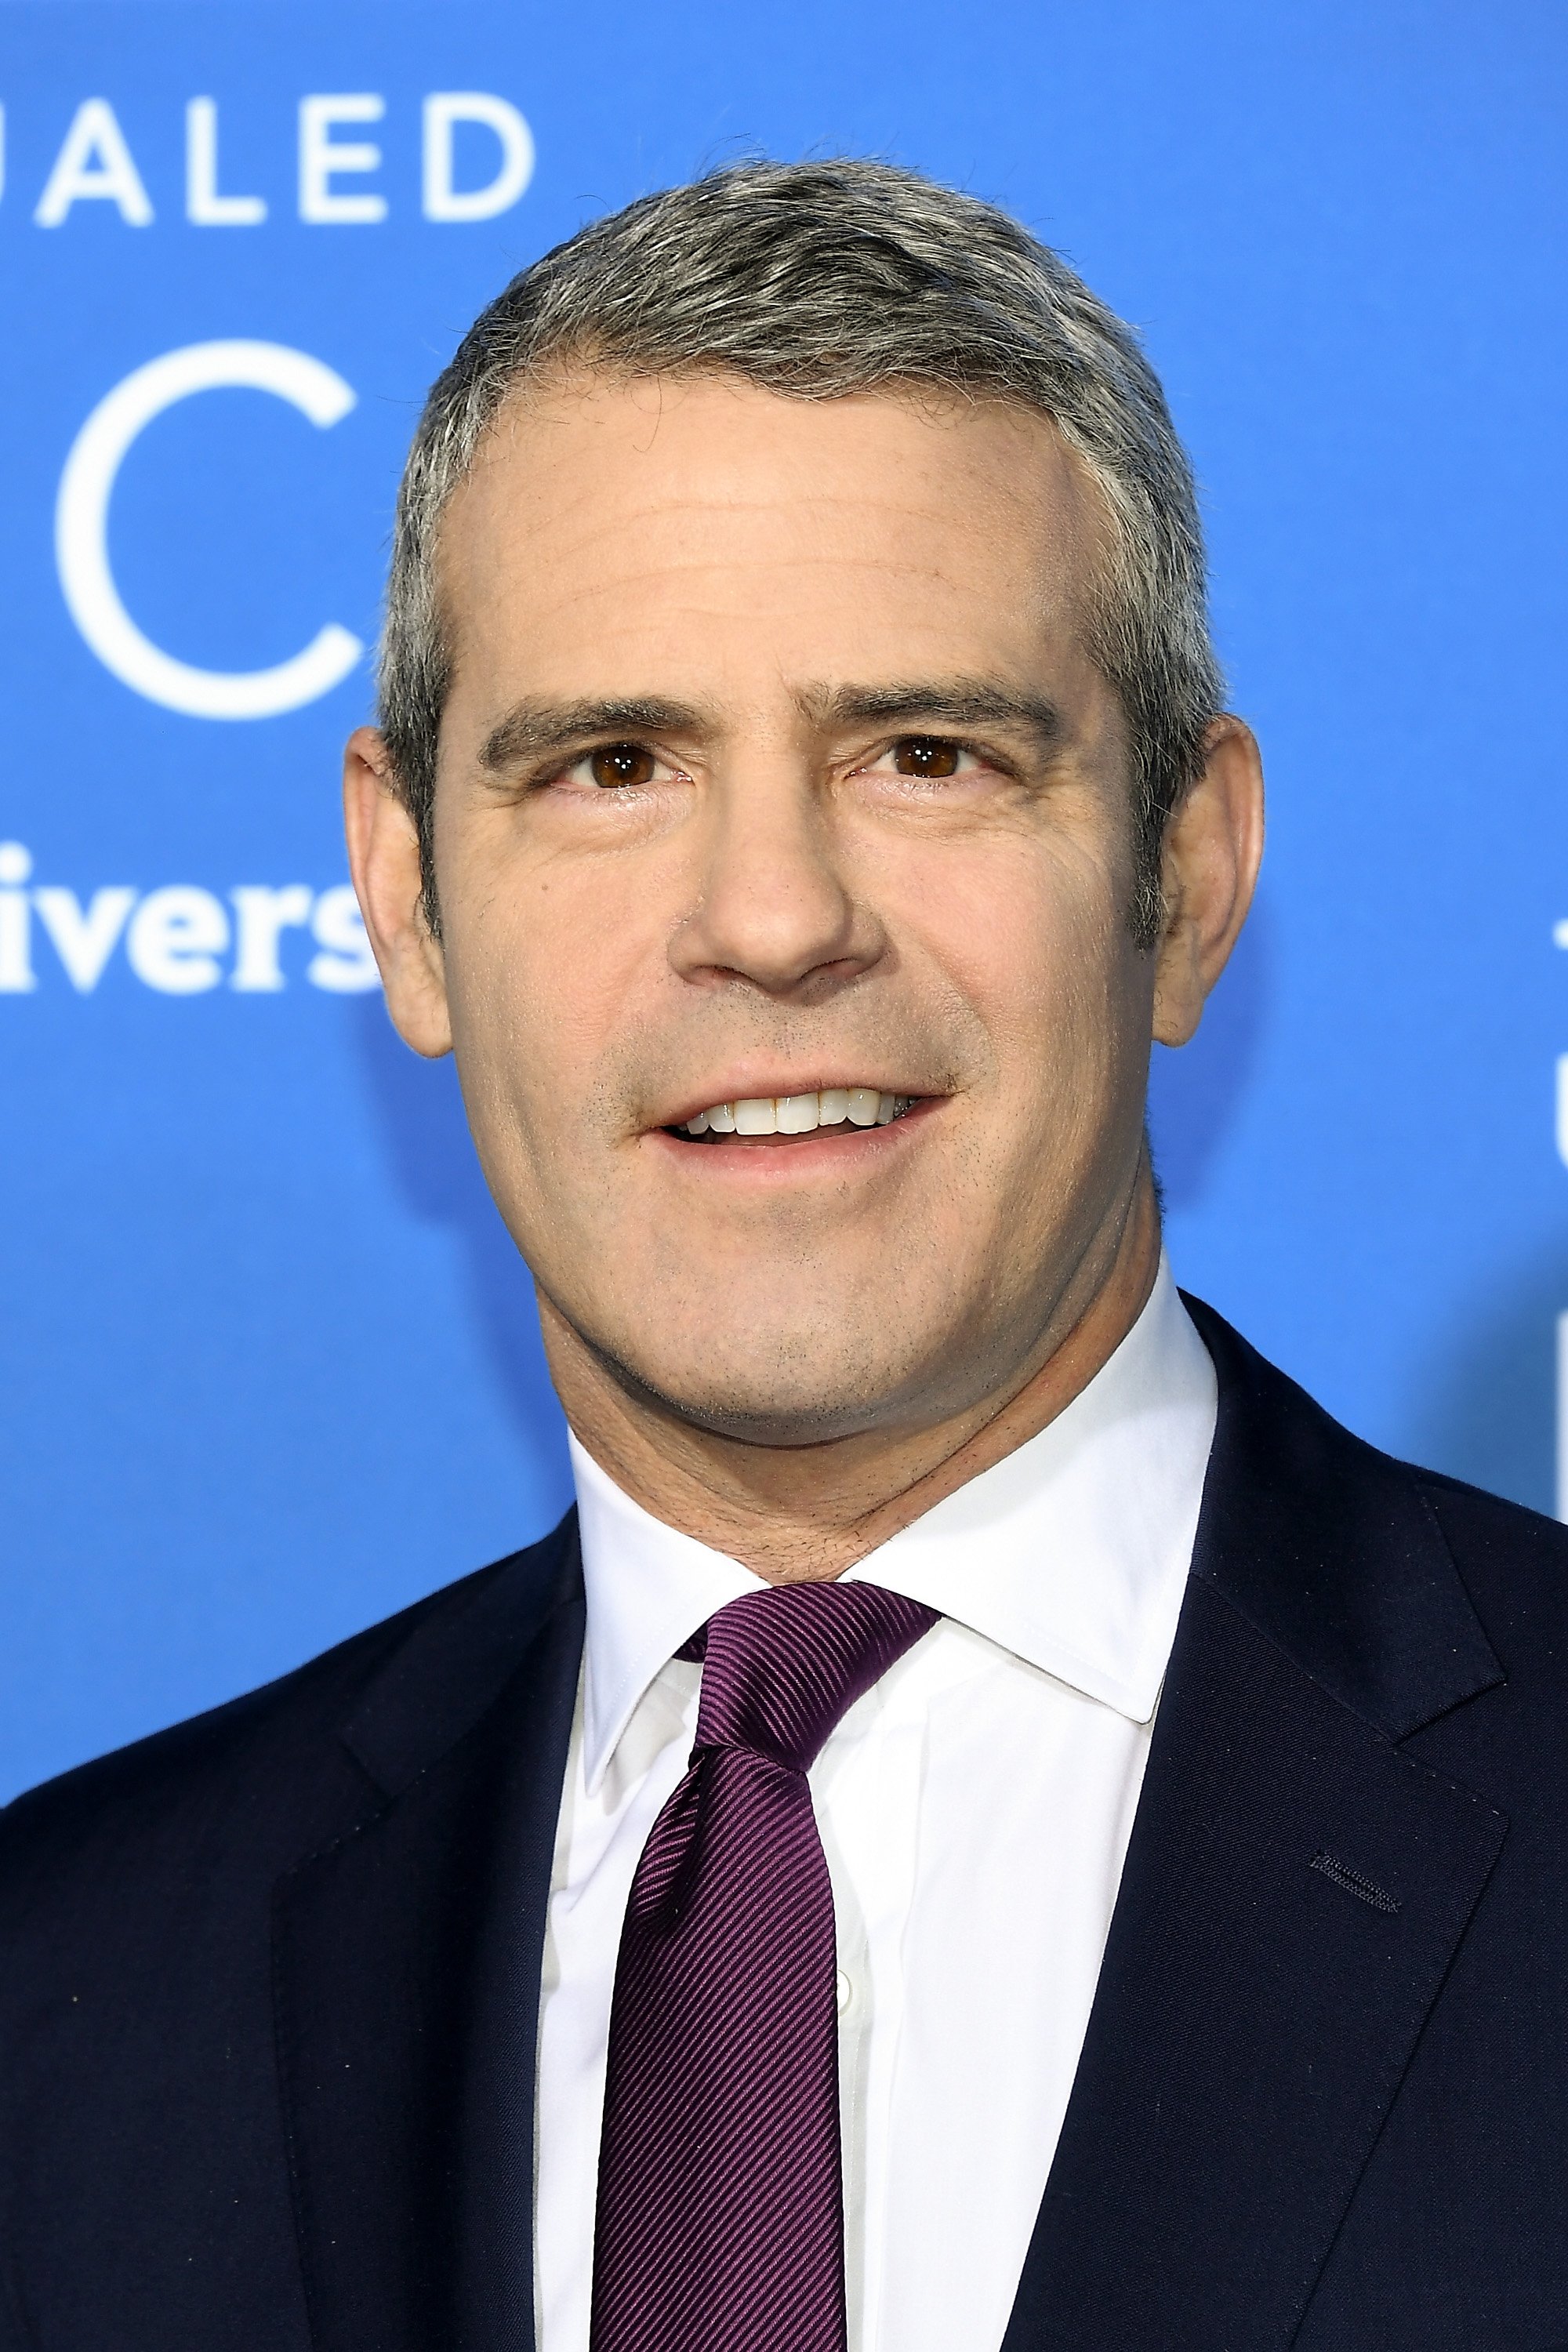 Andy Cohen attends the NBC Universal Upfront at Radio City Music Hall on May 15, 2017 in New York City. | Source: Getty Images.